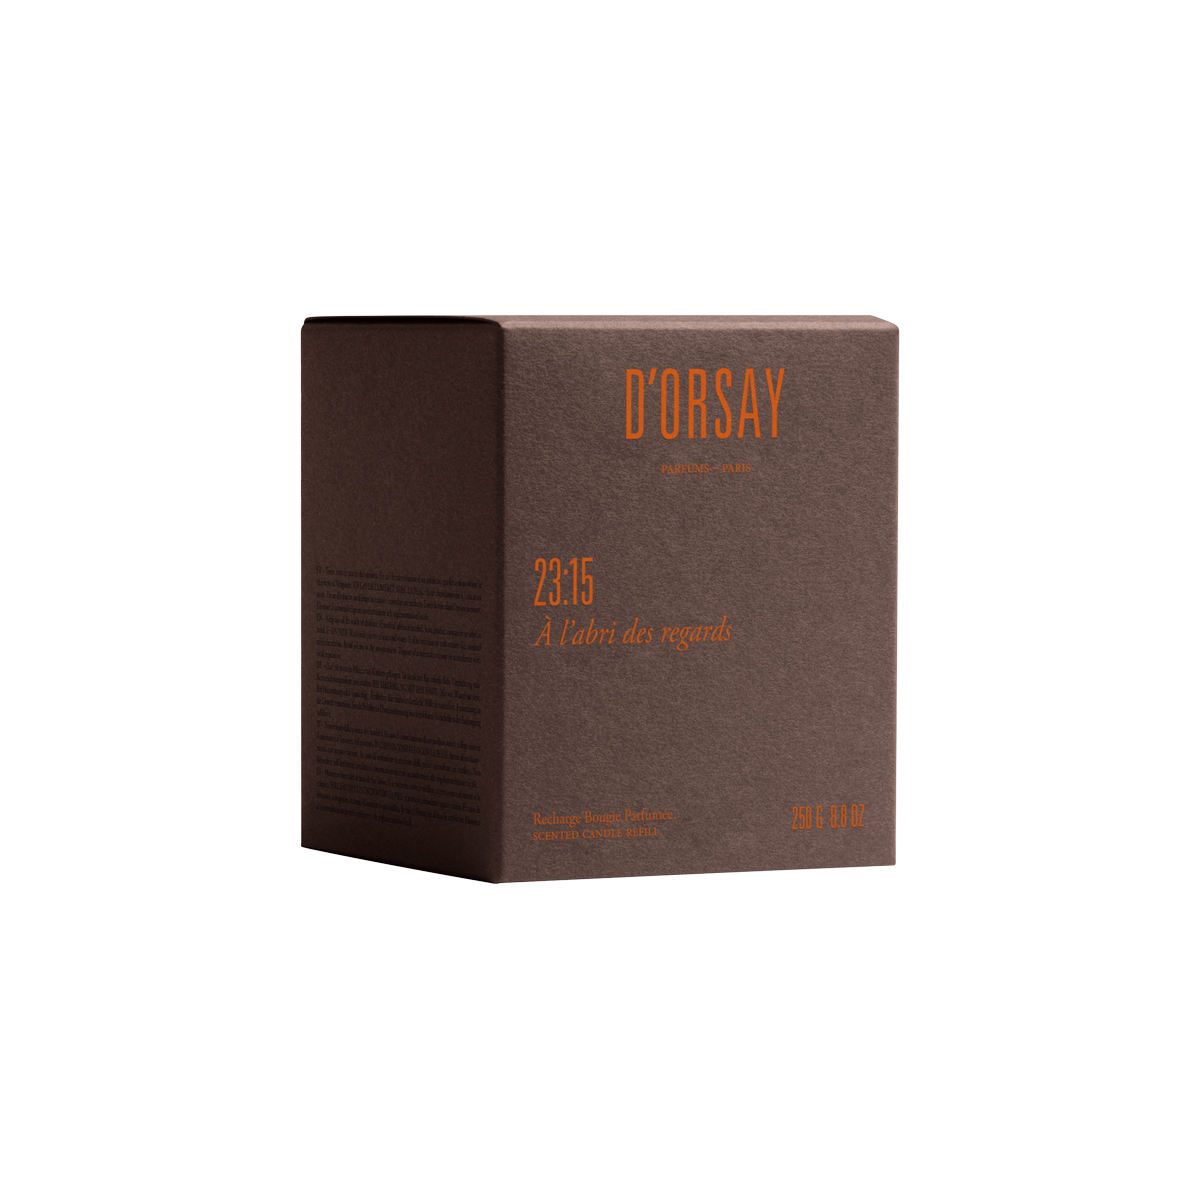 D'Orsay - Scented Candle 23:15 Refill